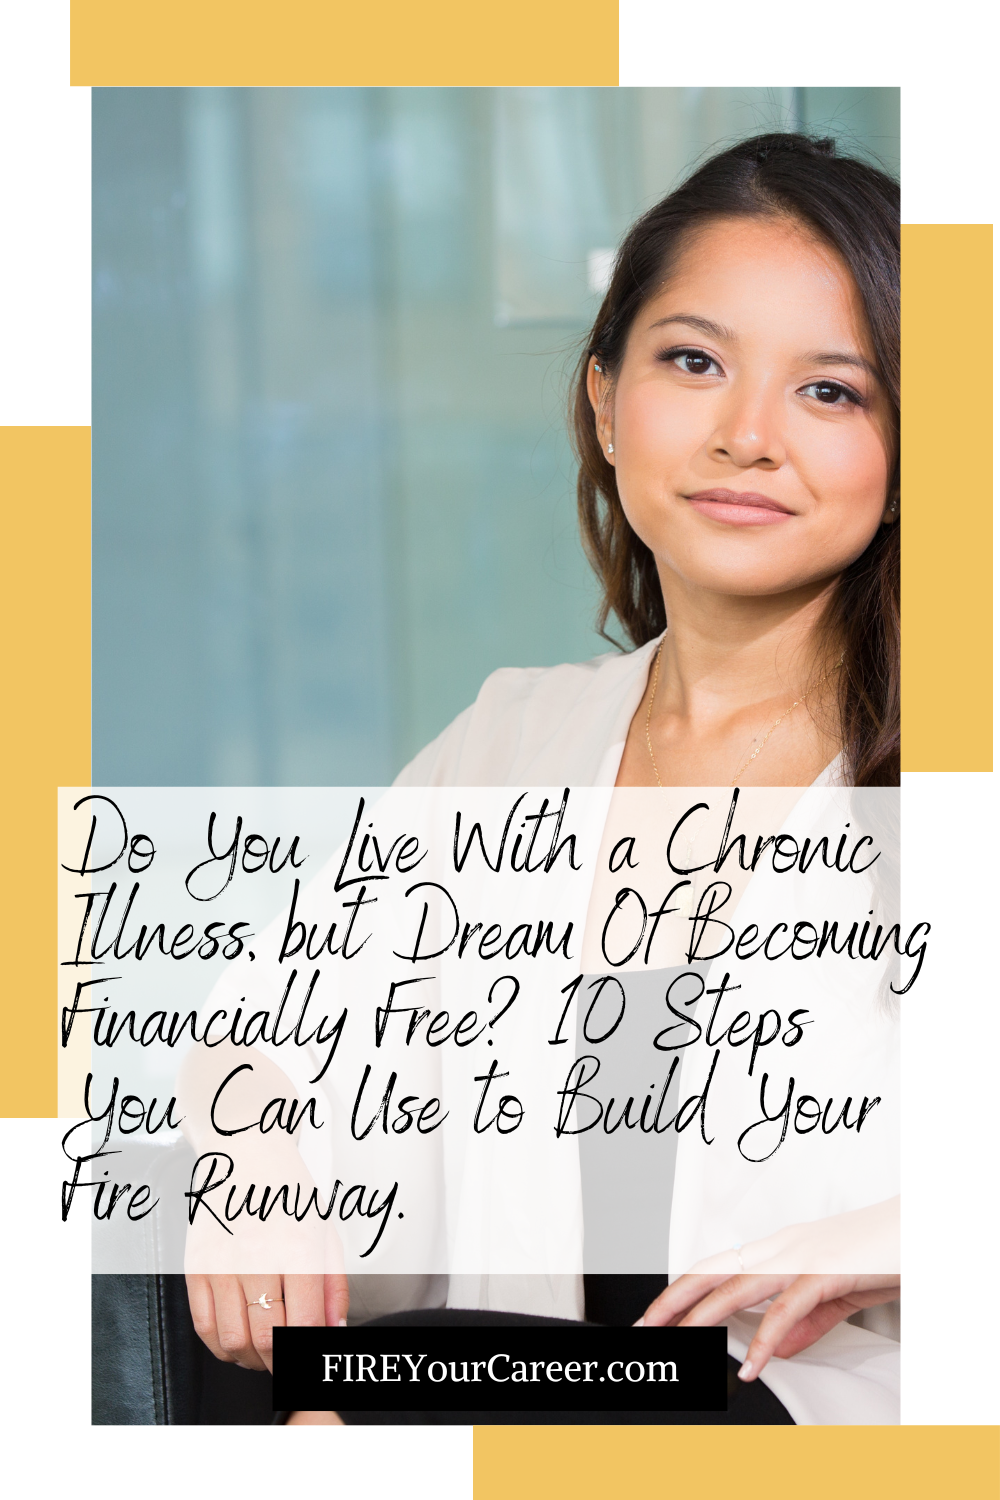 Do You Live With a Chronic Illness, but Dream Of Becoming Financially Free 10 Steps You Can Use to Build Your Fire Runway When You Have a Disability.